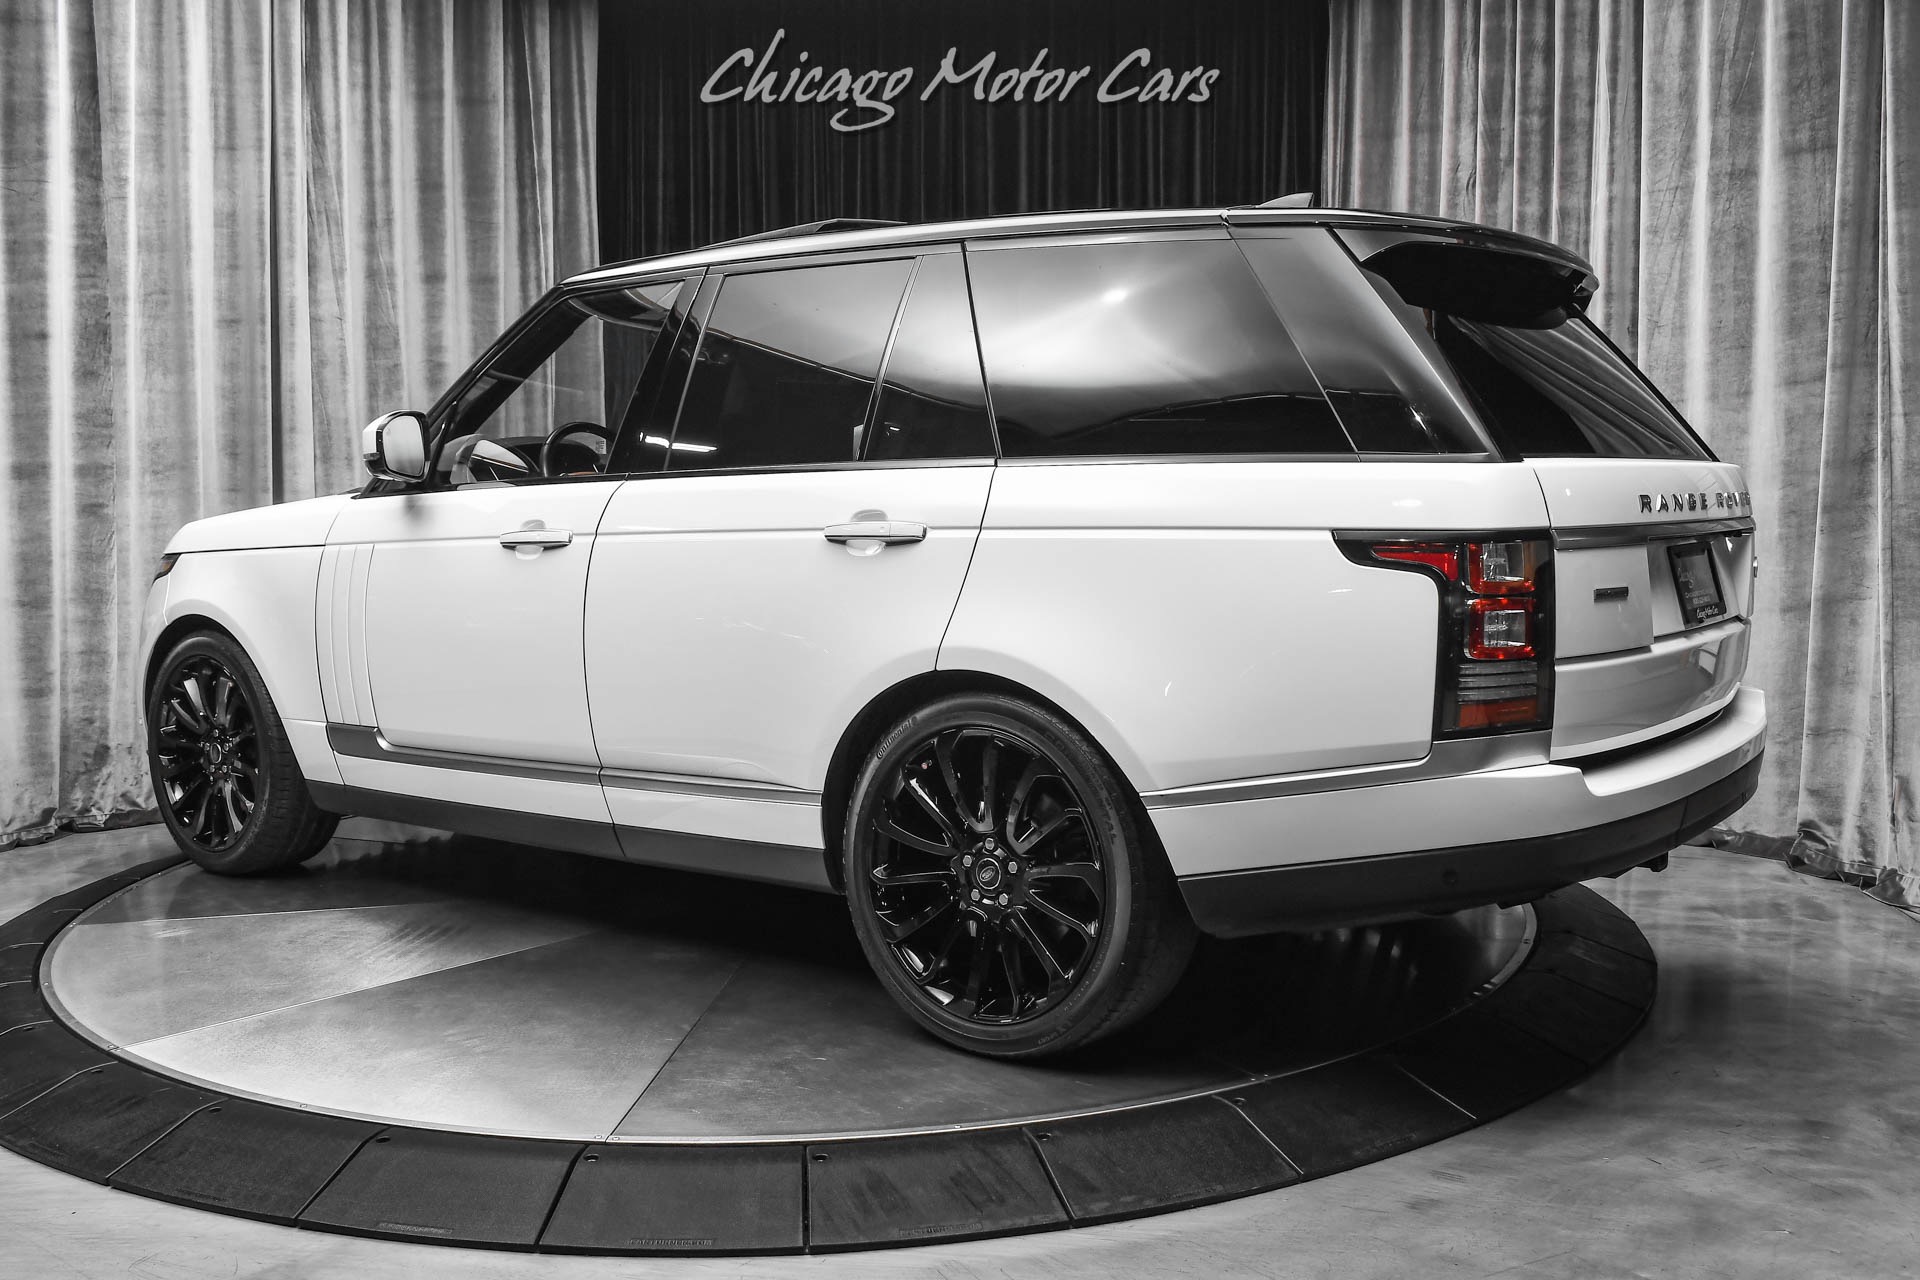 Used-2017-Land-Rover-Range-Rover-Autobiography-SUV-50L-V8-Supercharged-Hot-Color-Combo